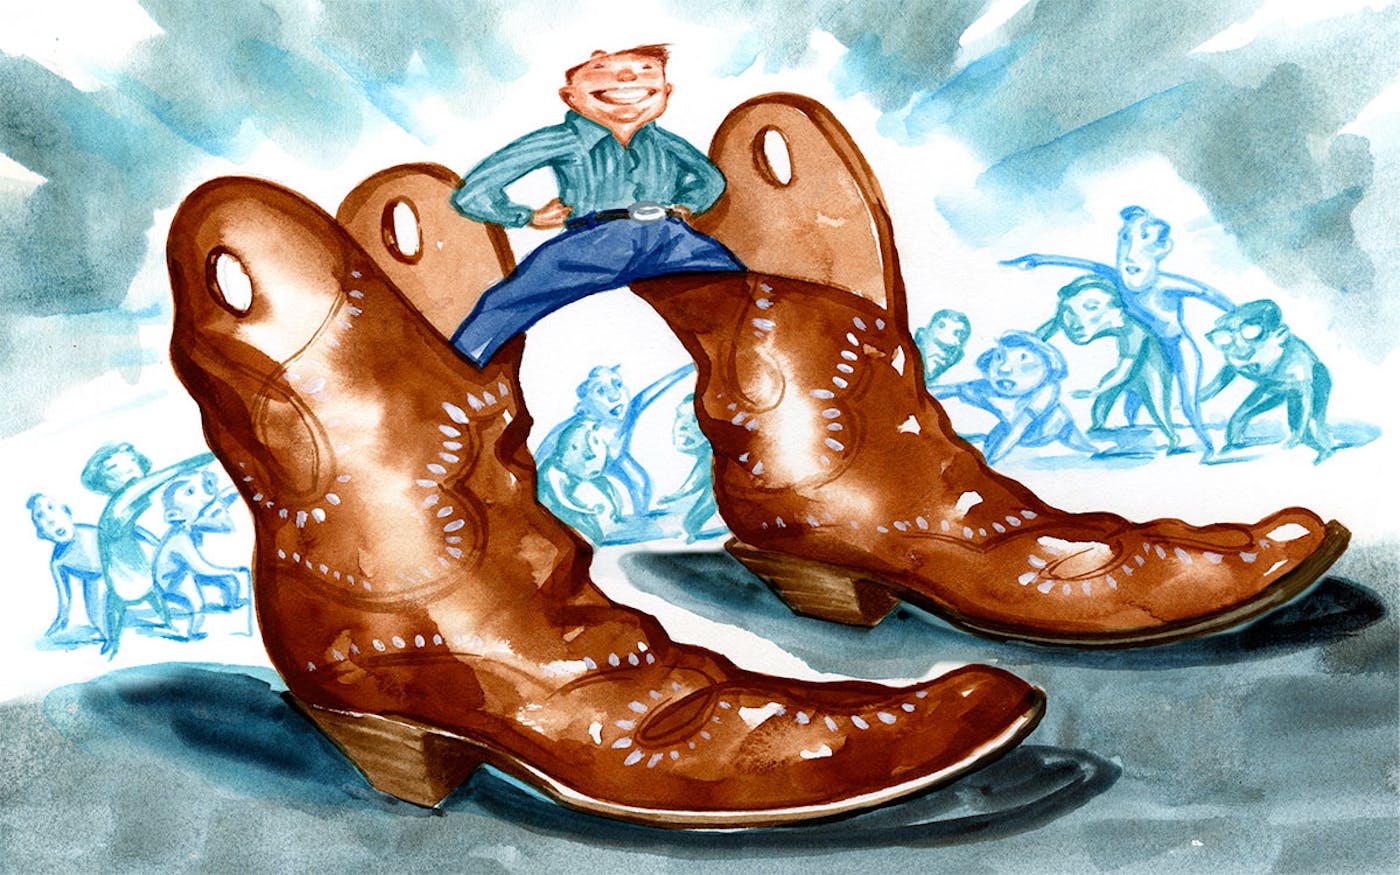 Can You Wear Cowboy Boots with Skinny Jeans? Women's Guide and Men's Style  Tips 